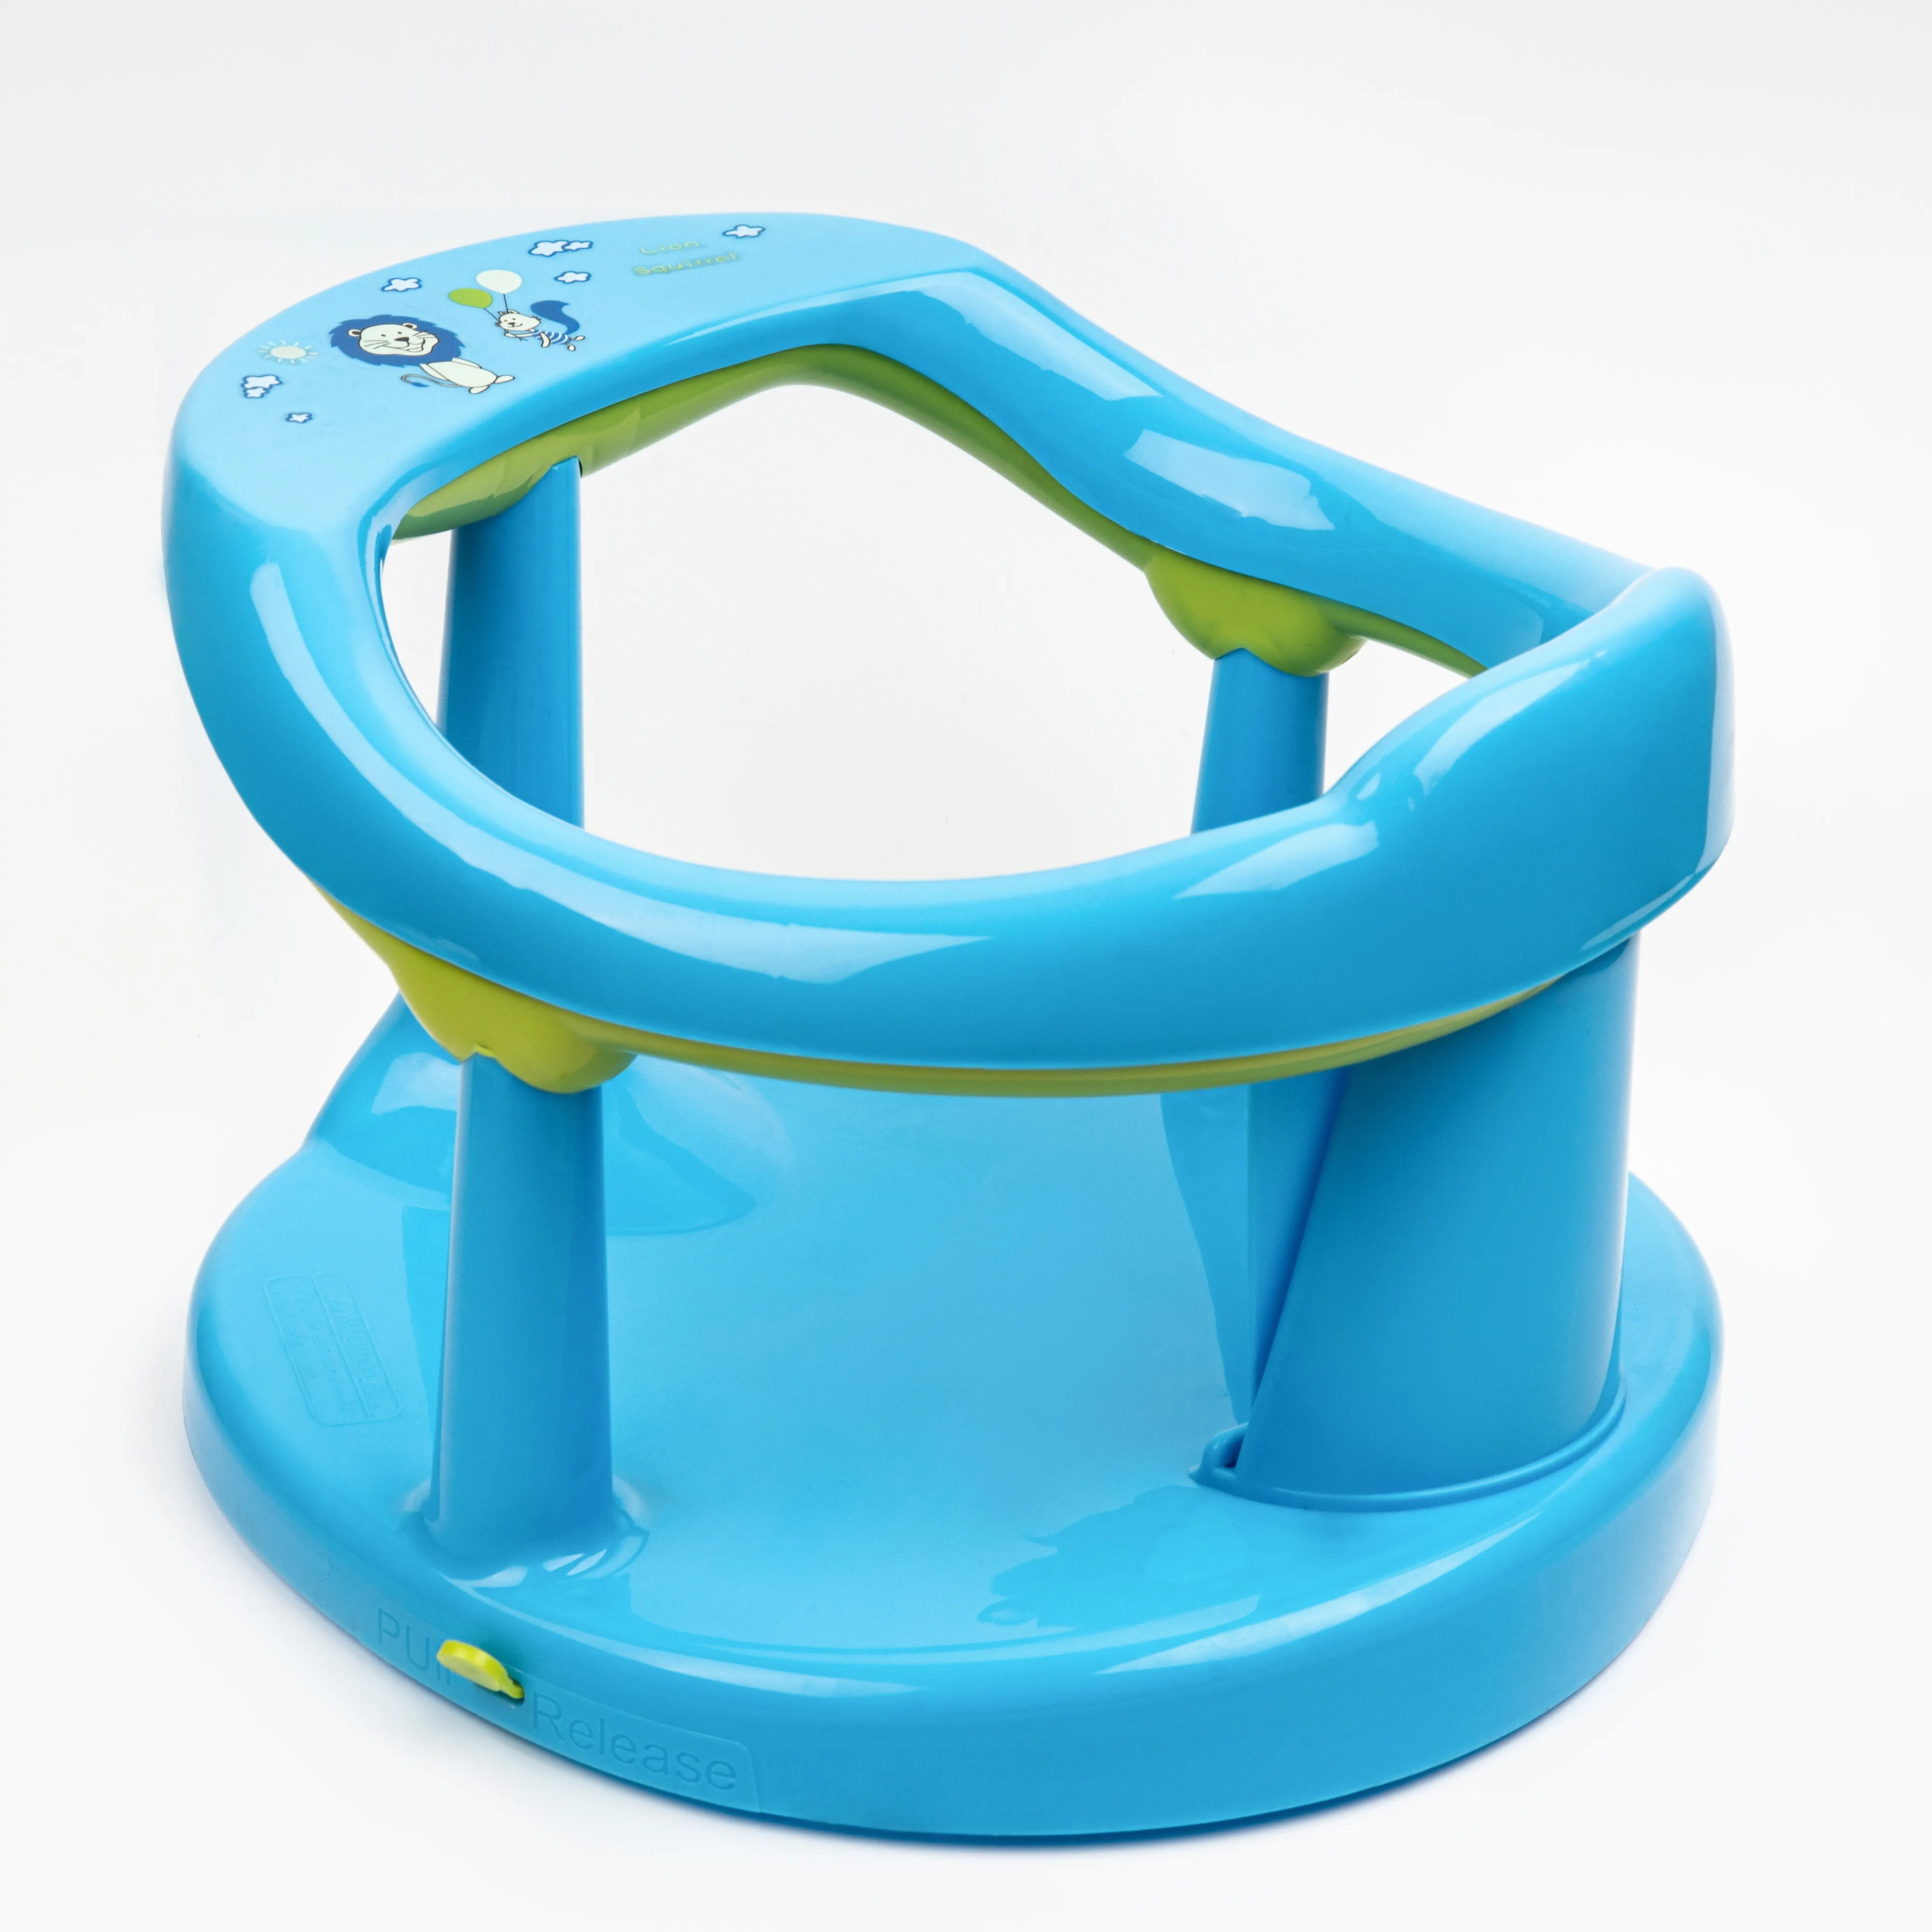 Hot sale spatter-proof Safety Non Toxic bath chair for babies with Suction cup Functional ring chair for a baby bath